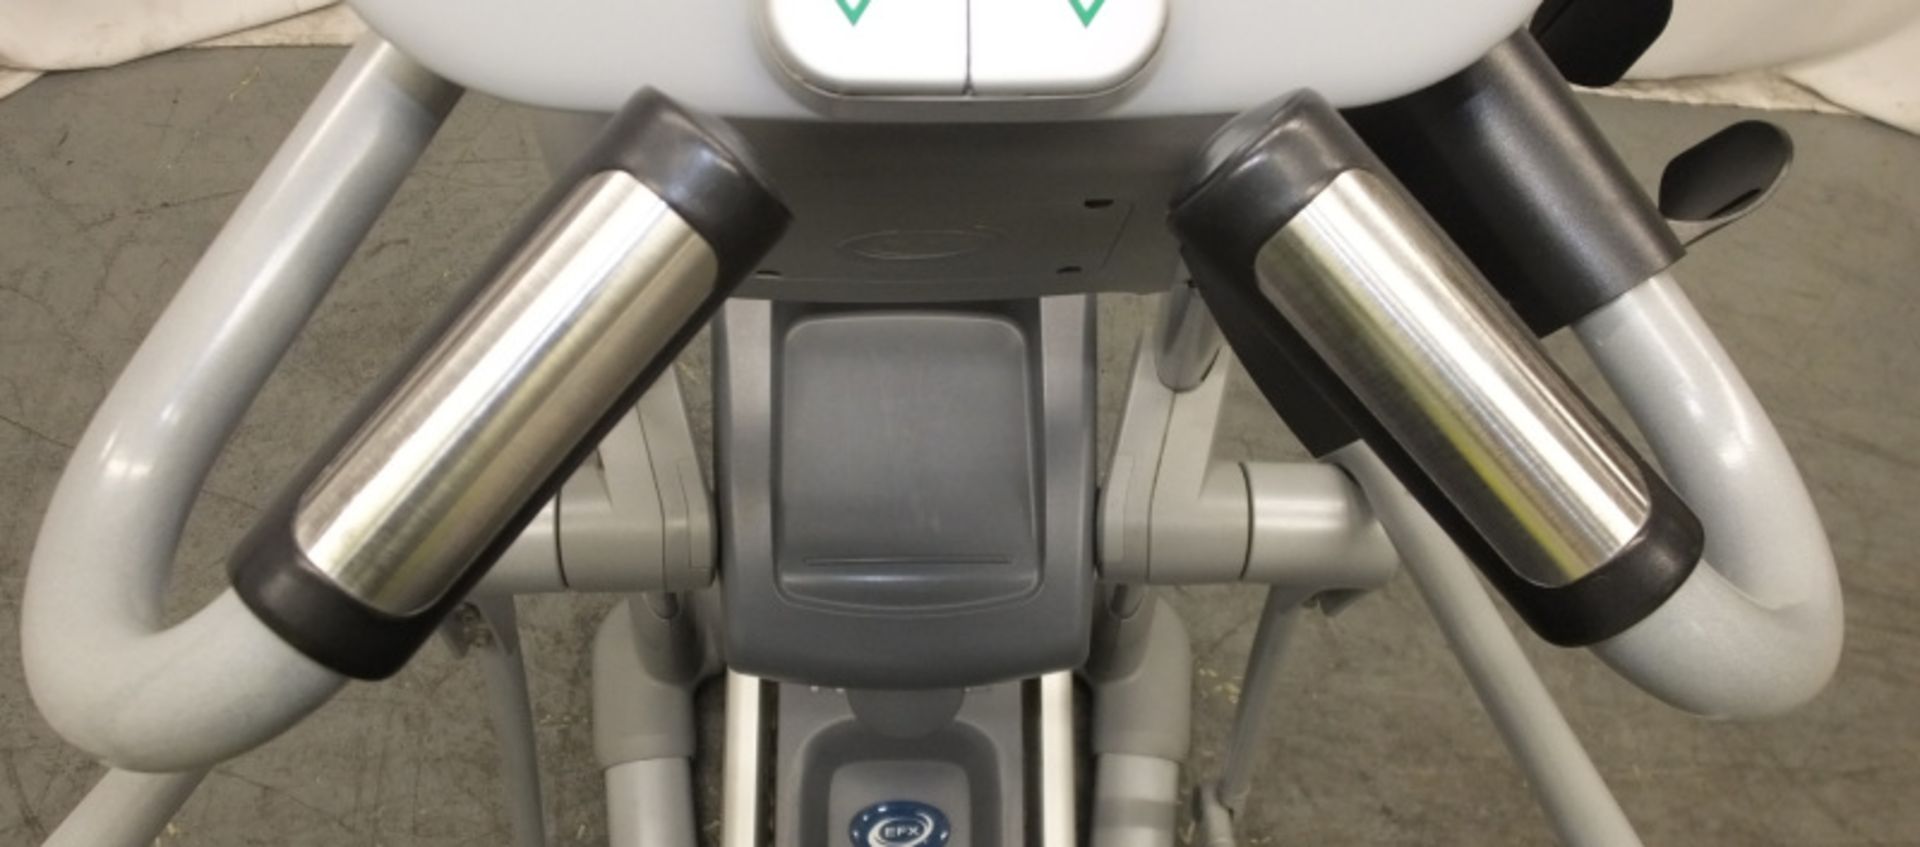 Precor EFX 576i Elliptical Cross Trainer - Left arm section loose, please see pictures for - Image 8 of 13